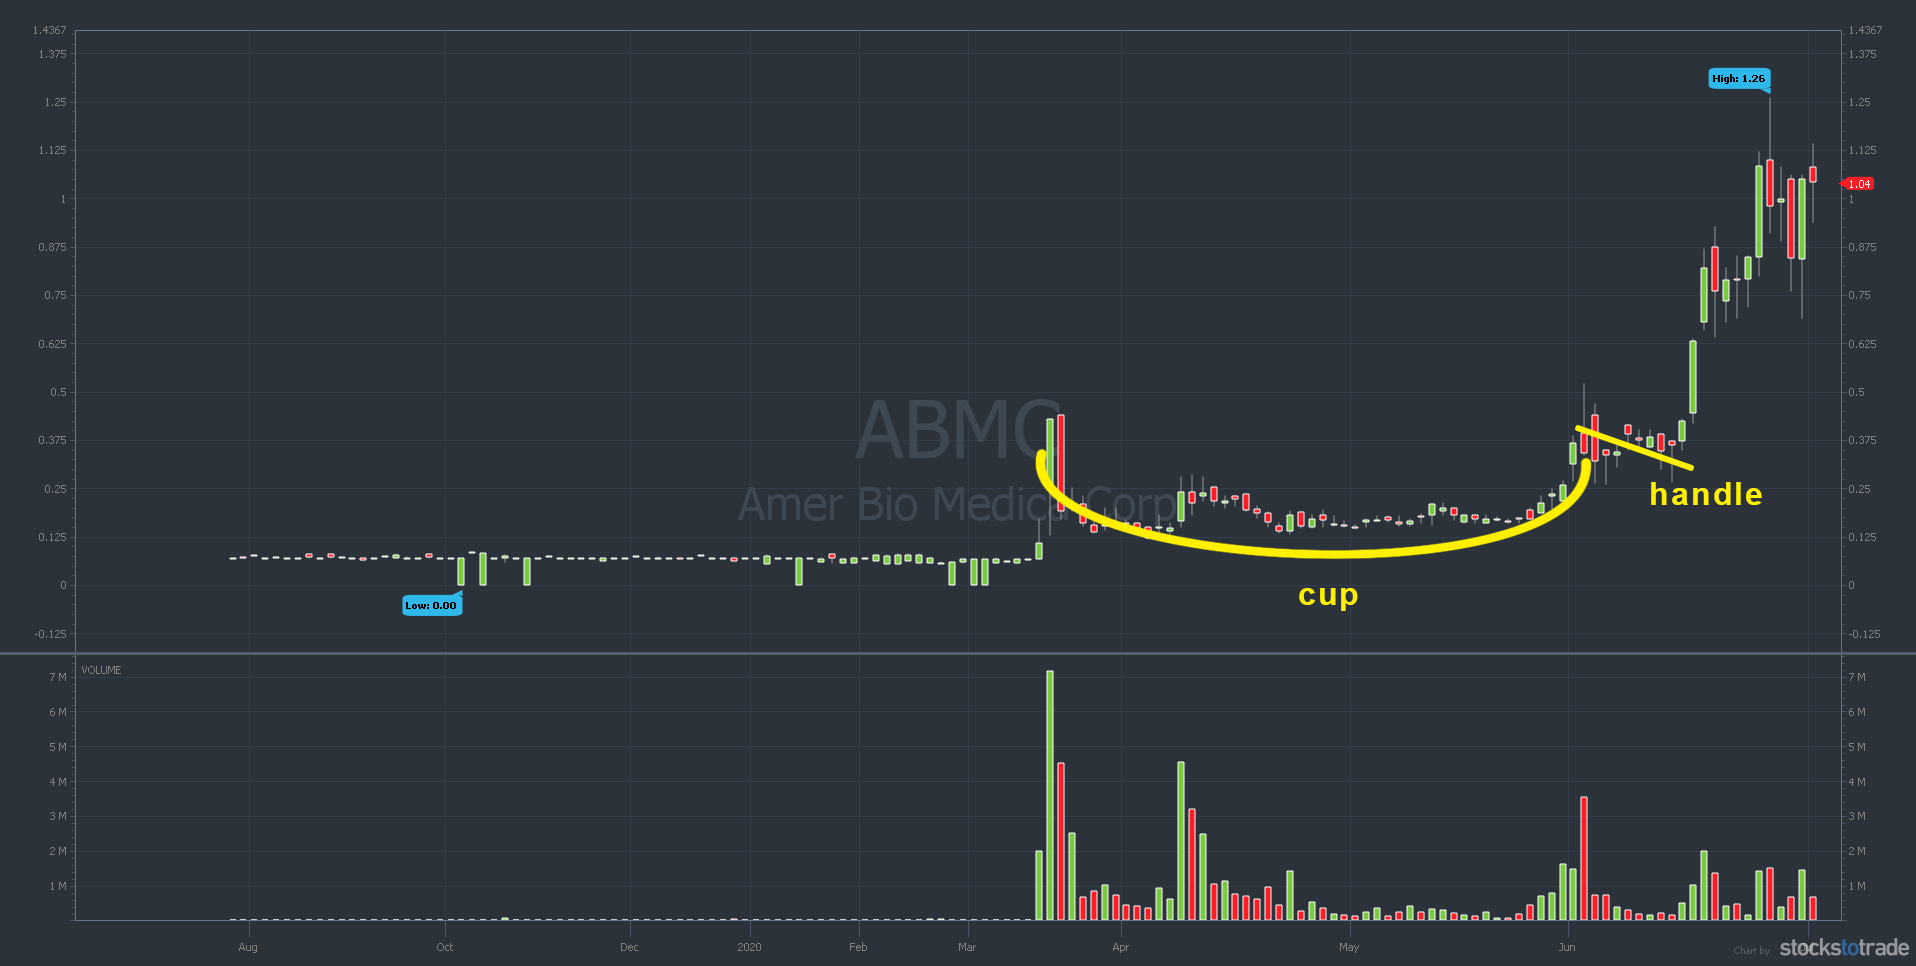 cup And handle abmc 1 year